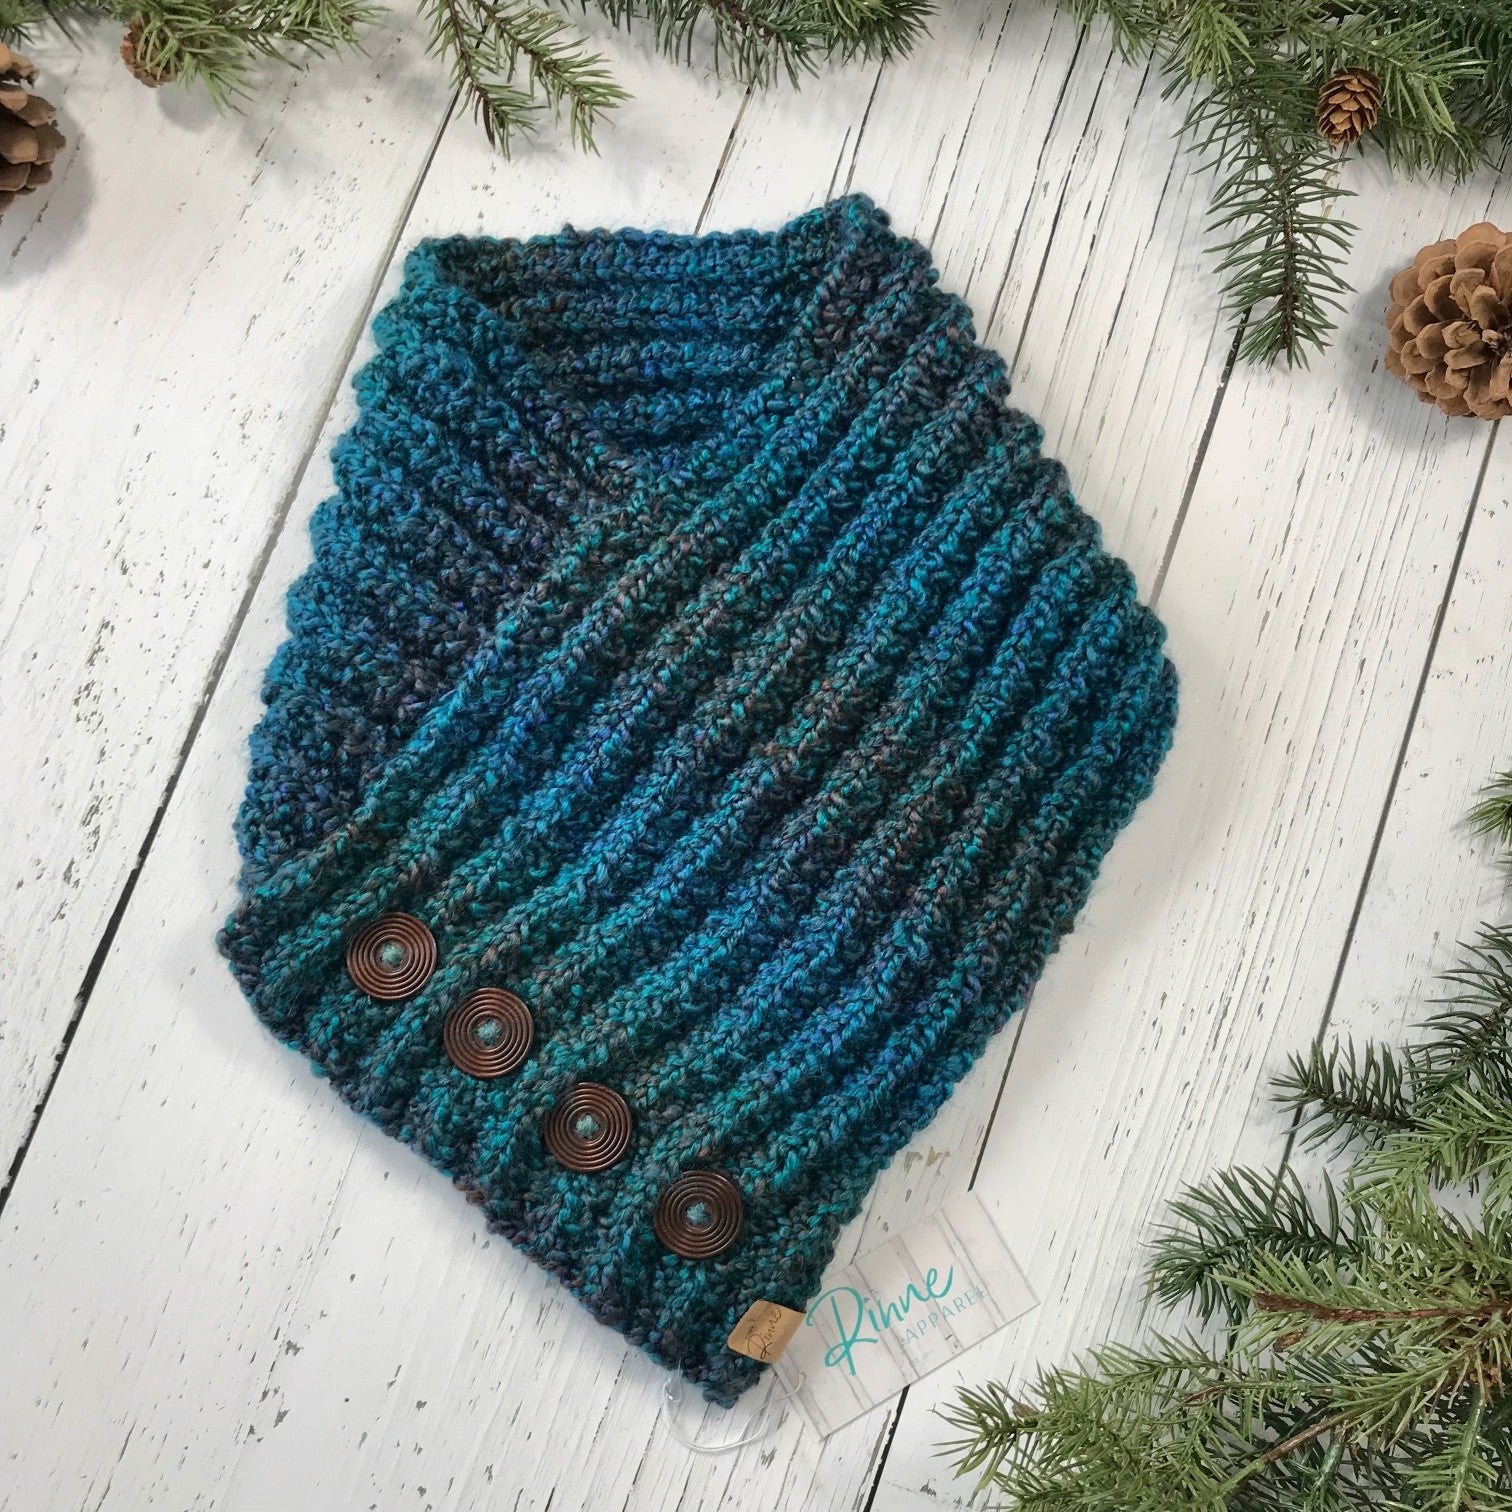 Classic Knit Button Cowl in lagoon, shades of dark teal and navy, dark wooden ridged buttons